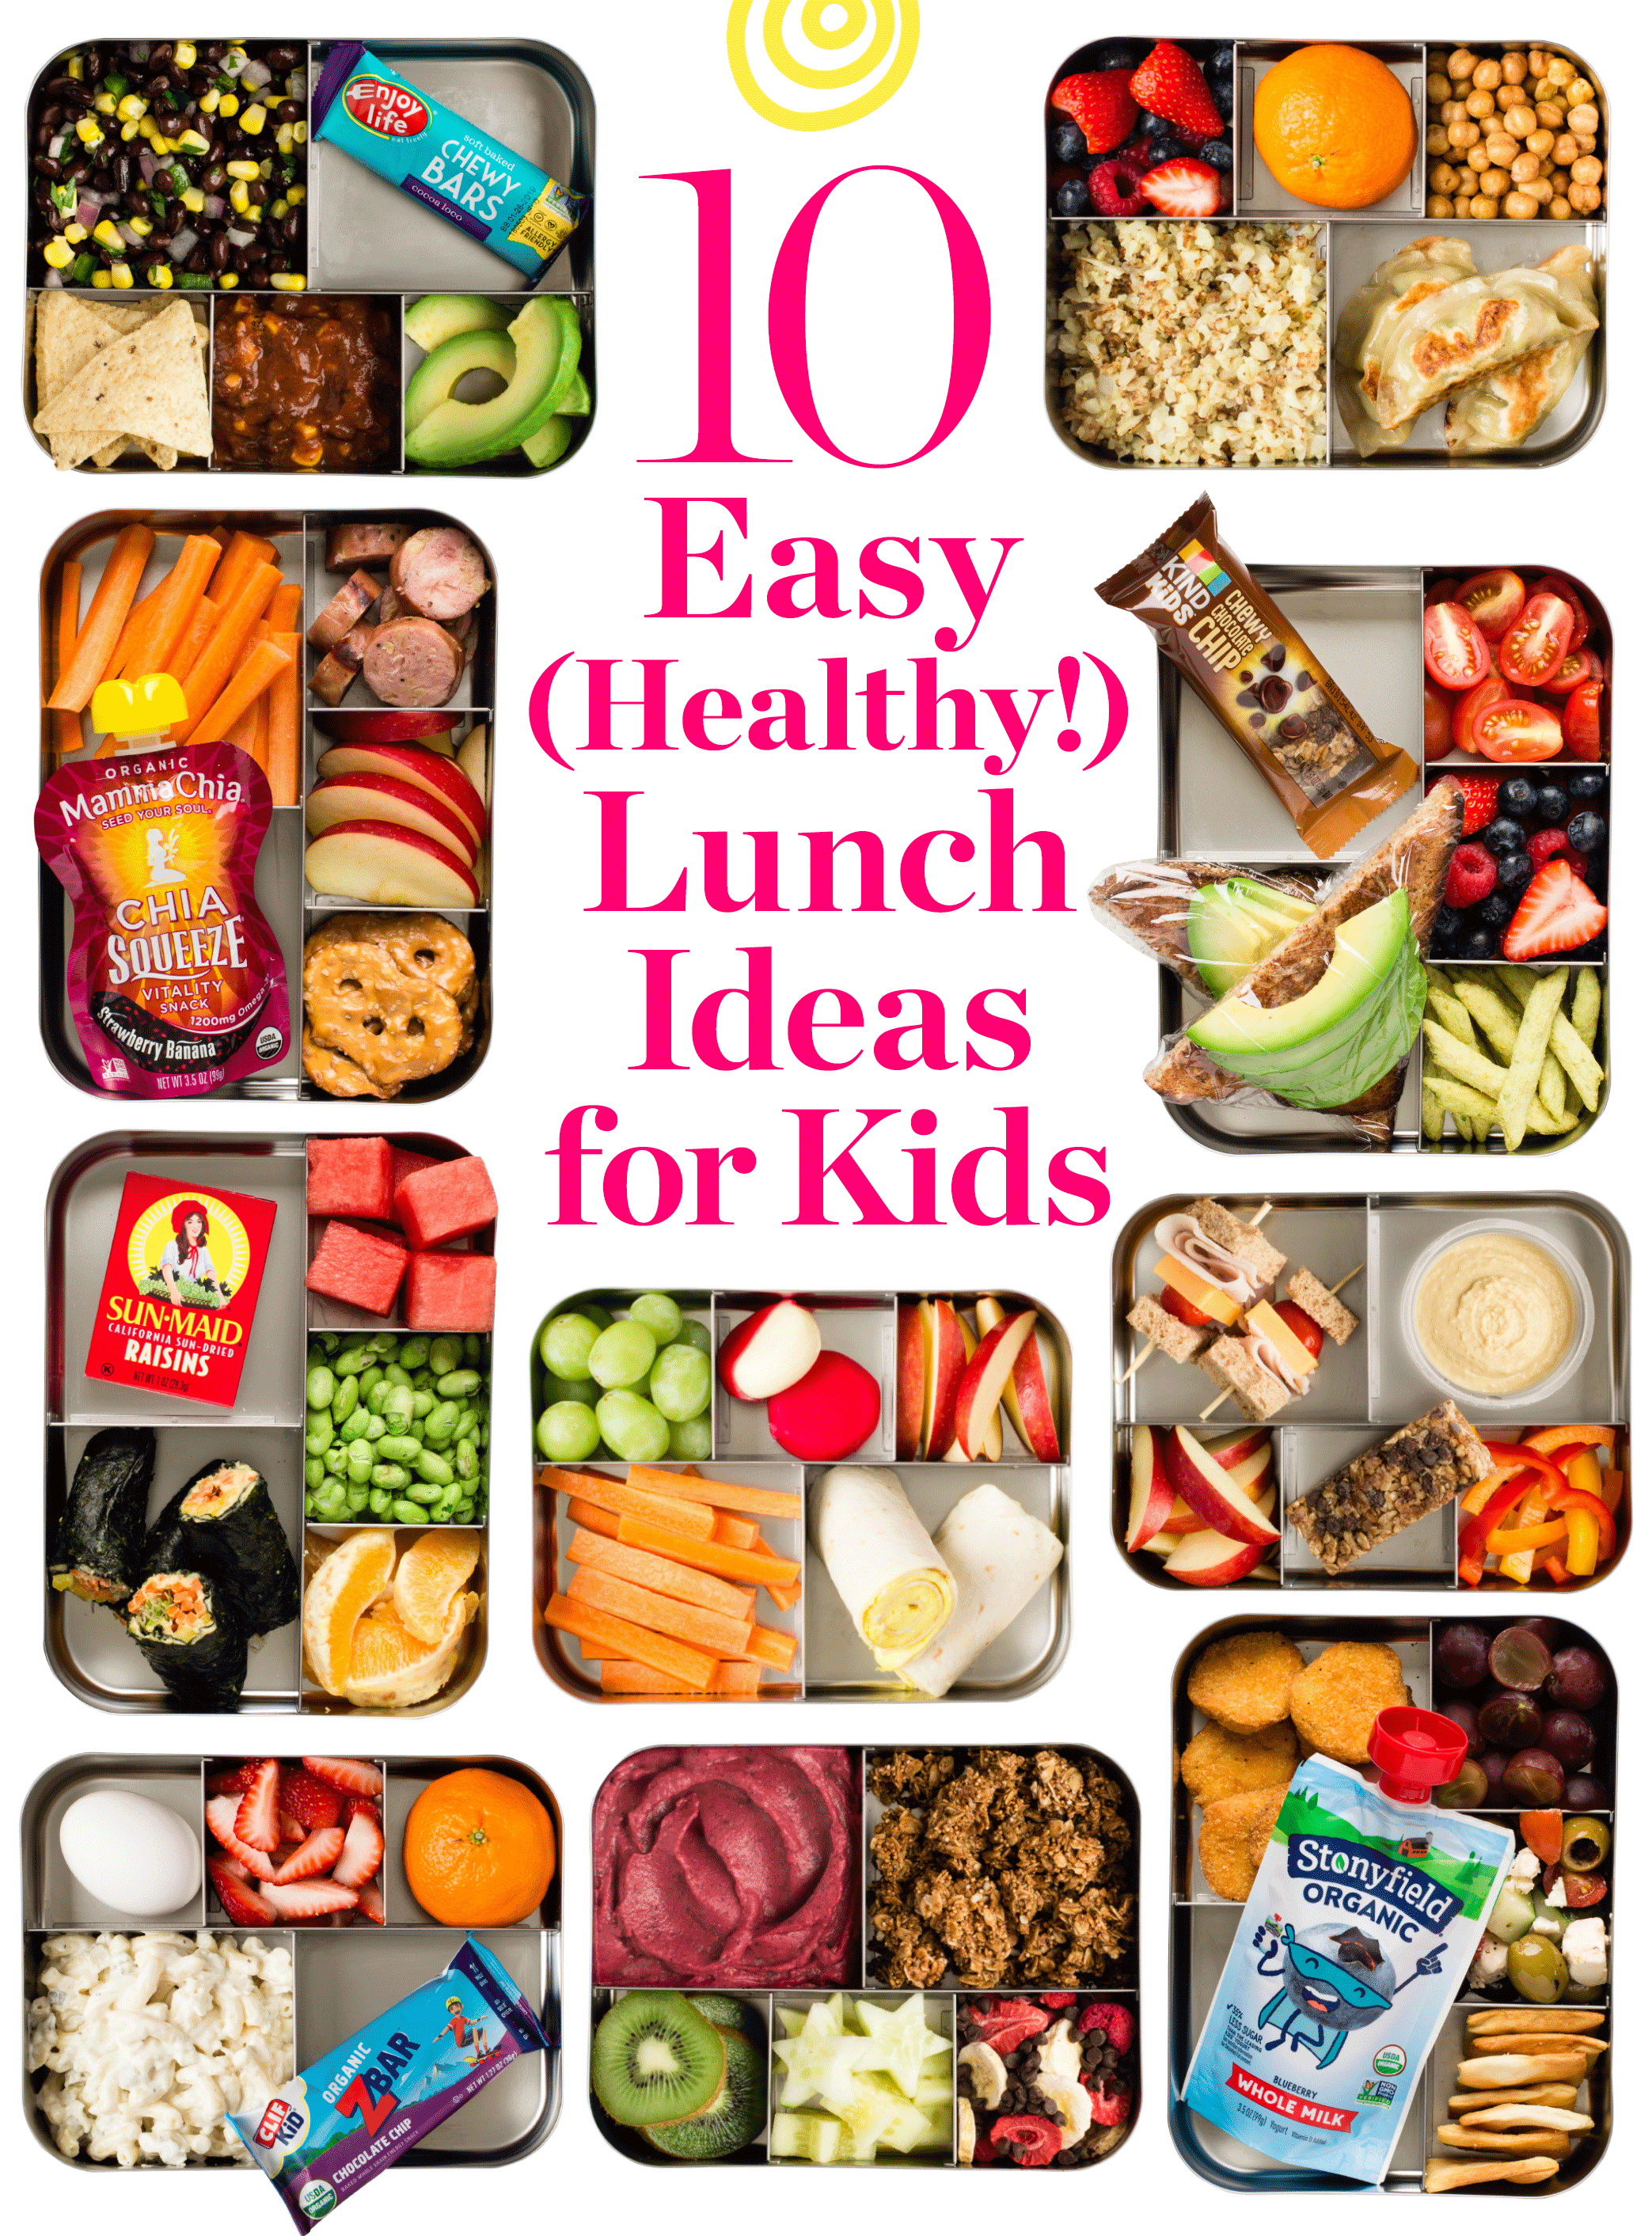 Steps to Prepare Food Healthy Lunch Ideas For Kids